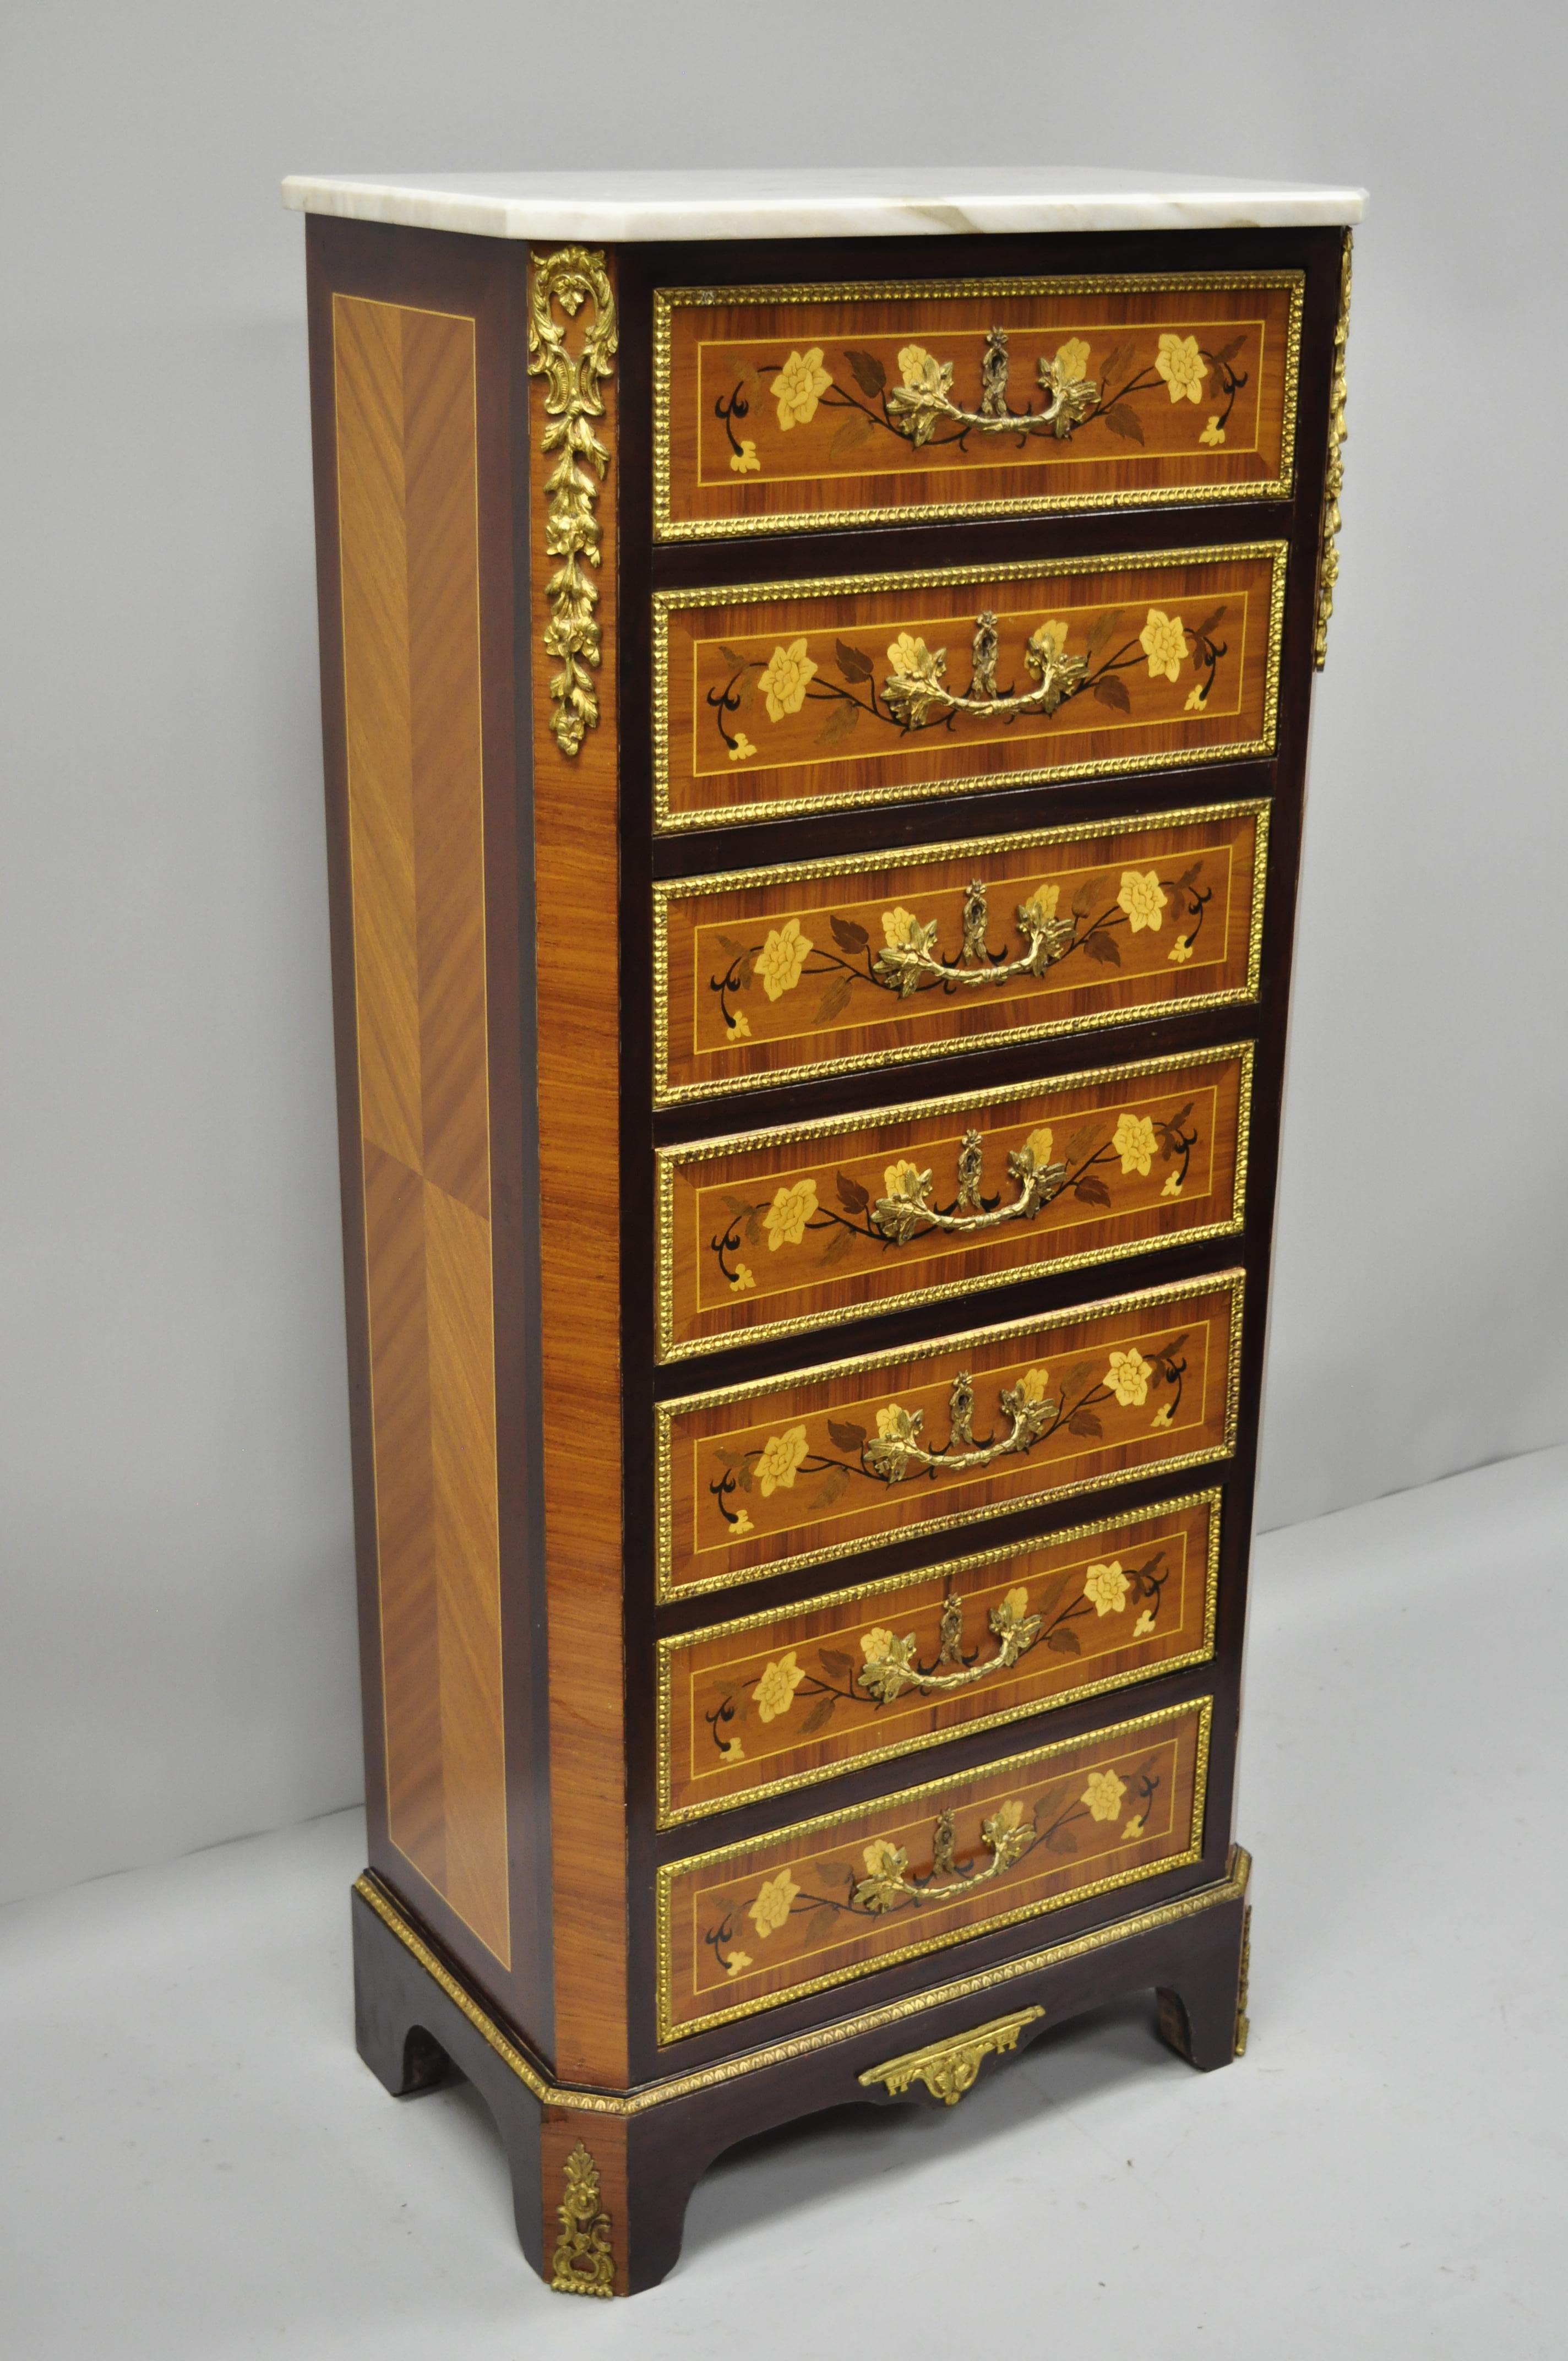 Marble-top inlaid seven-drawer lingerie tall chest. Item features white marble top, satinwood floral inlay, brass floral ormolu, working lock and key, seven dovetailed drawers, and great style and form. circa late 20th century. Measurements: 55.25